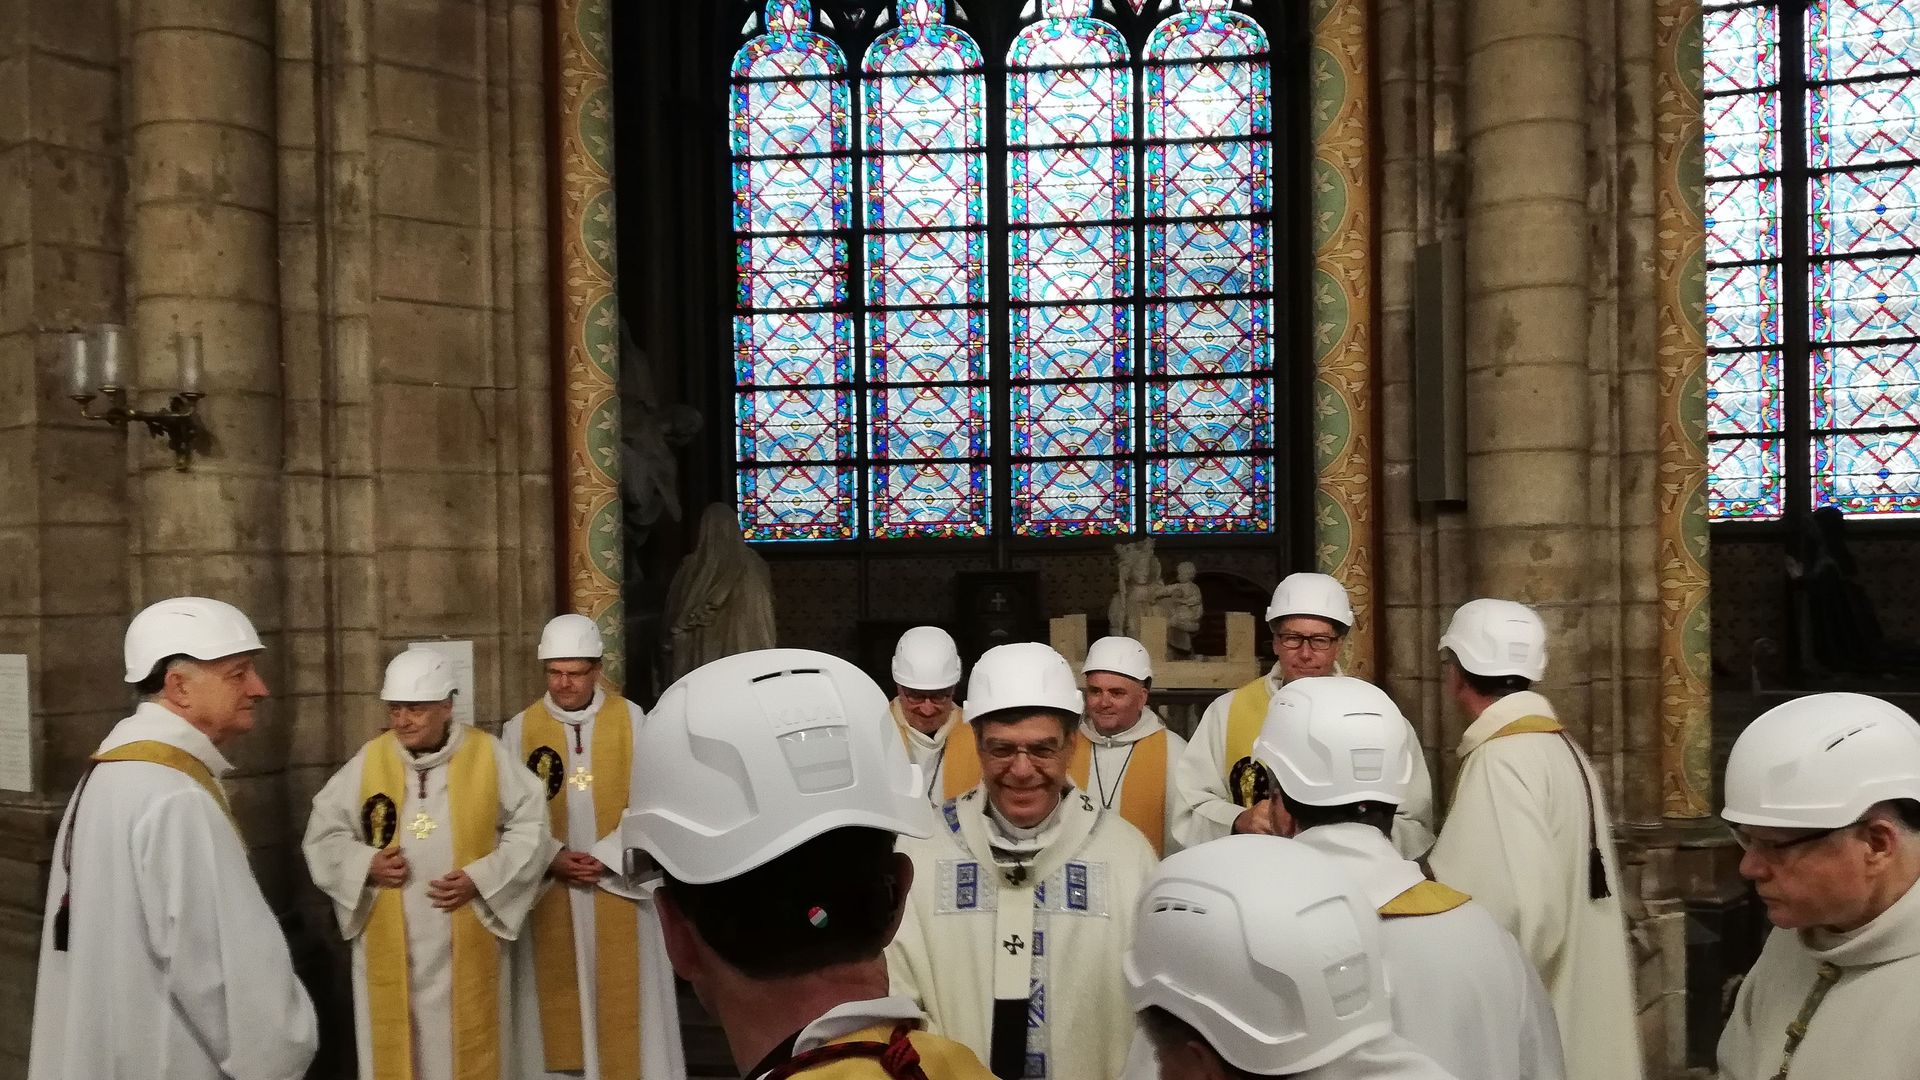 The Archbishop of Paris Michel Aupetit (C) greets other clergy following the first mass in a side chapel, after a fire engulfed the Notre-Dame de Paris cathedral, on June 15, 2019, in Paris.